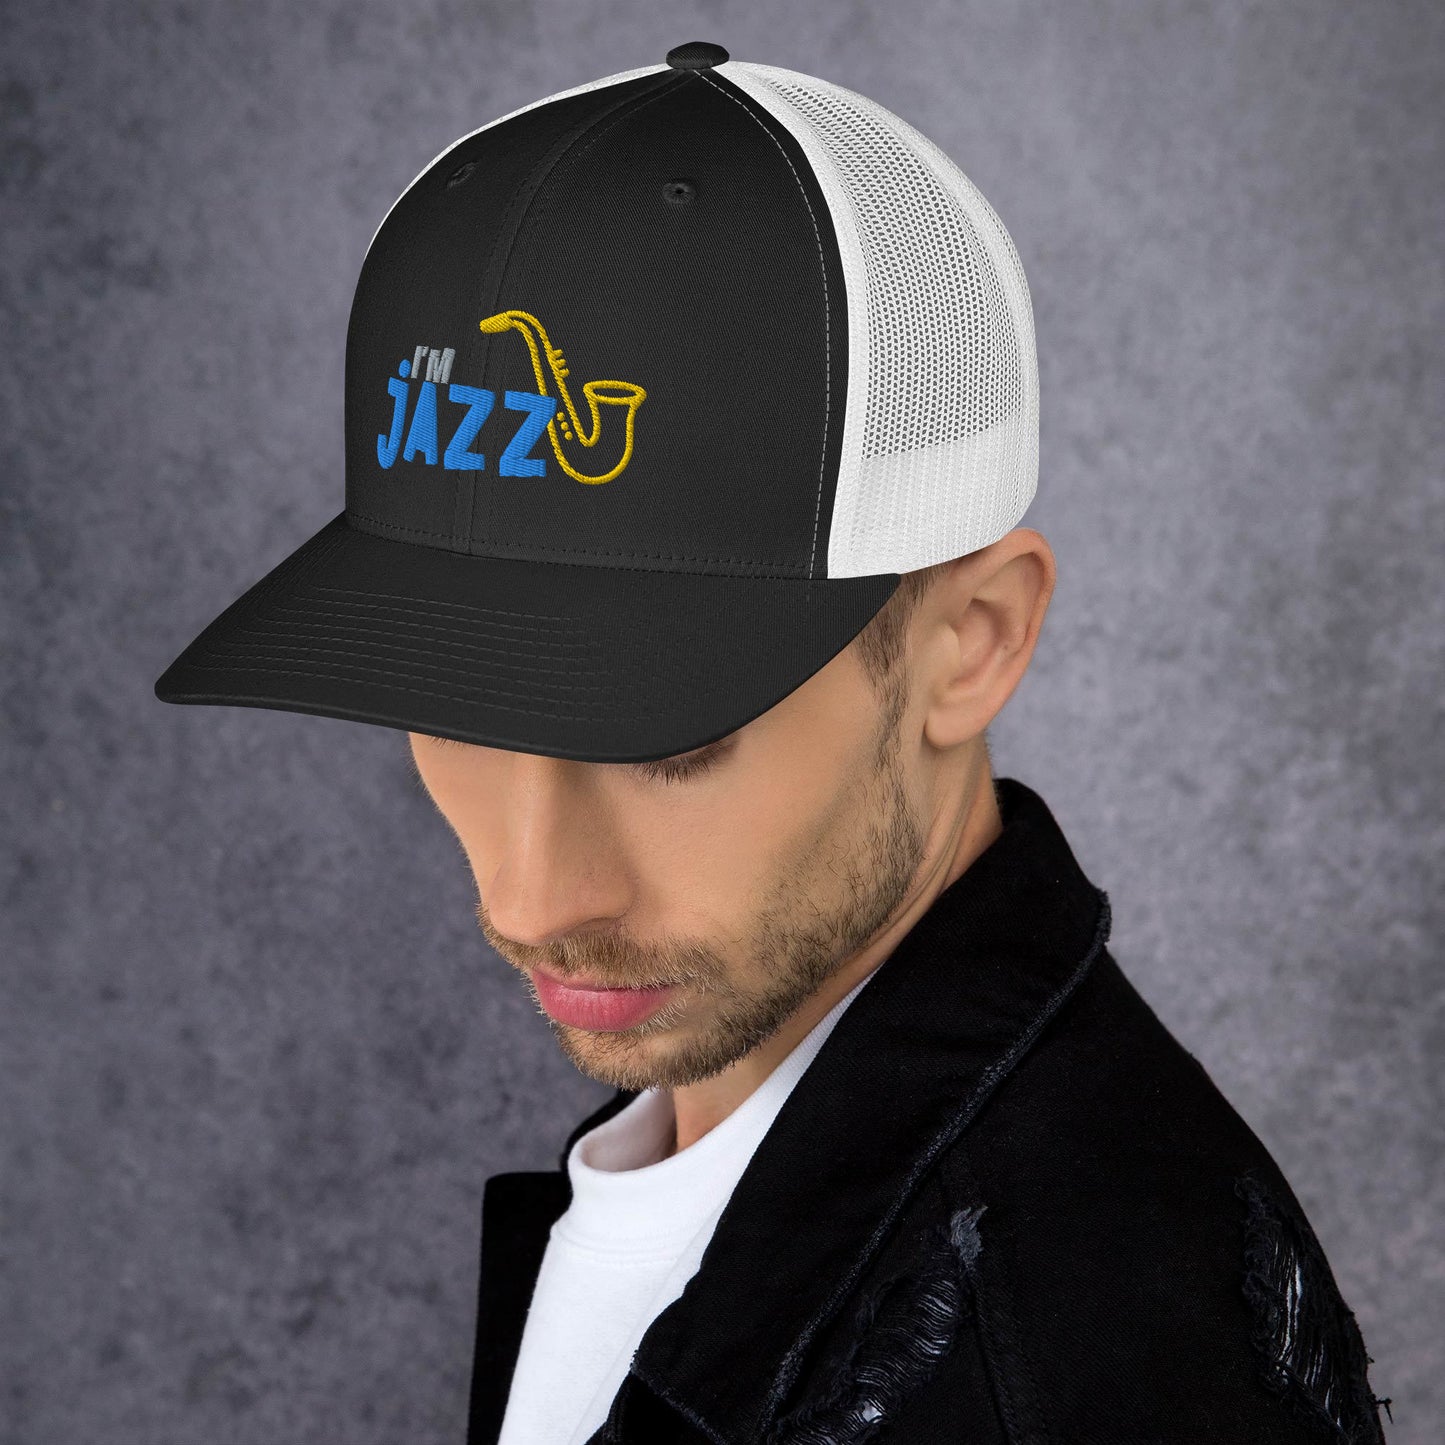 I'M JAZZ Trucker Cap (multiple colors available)